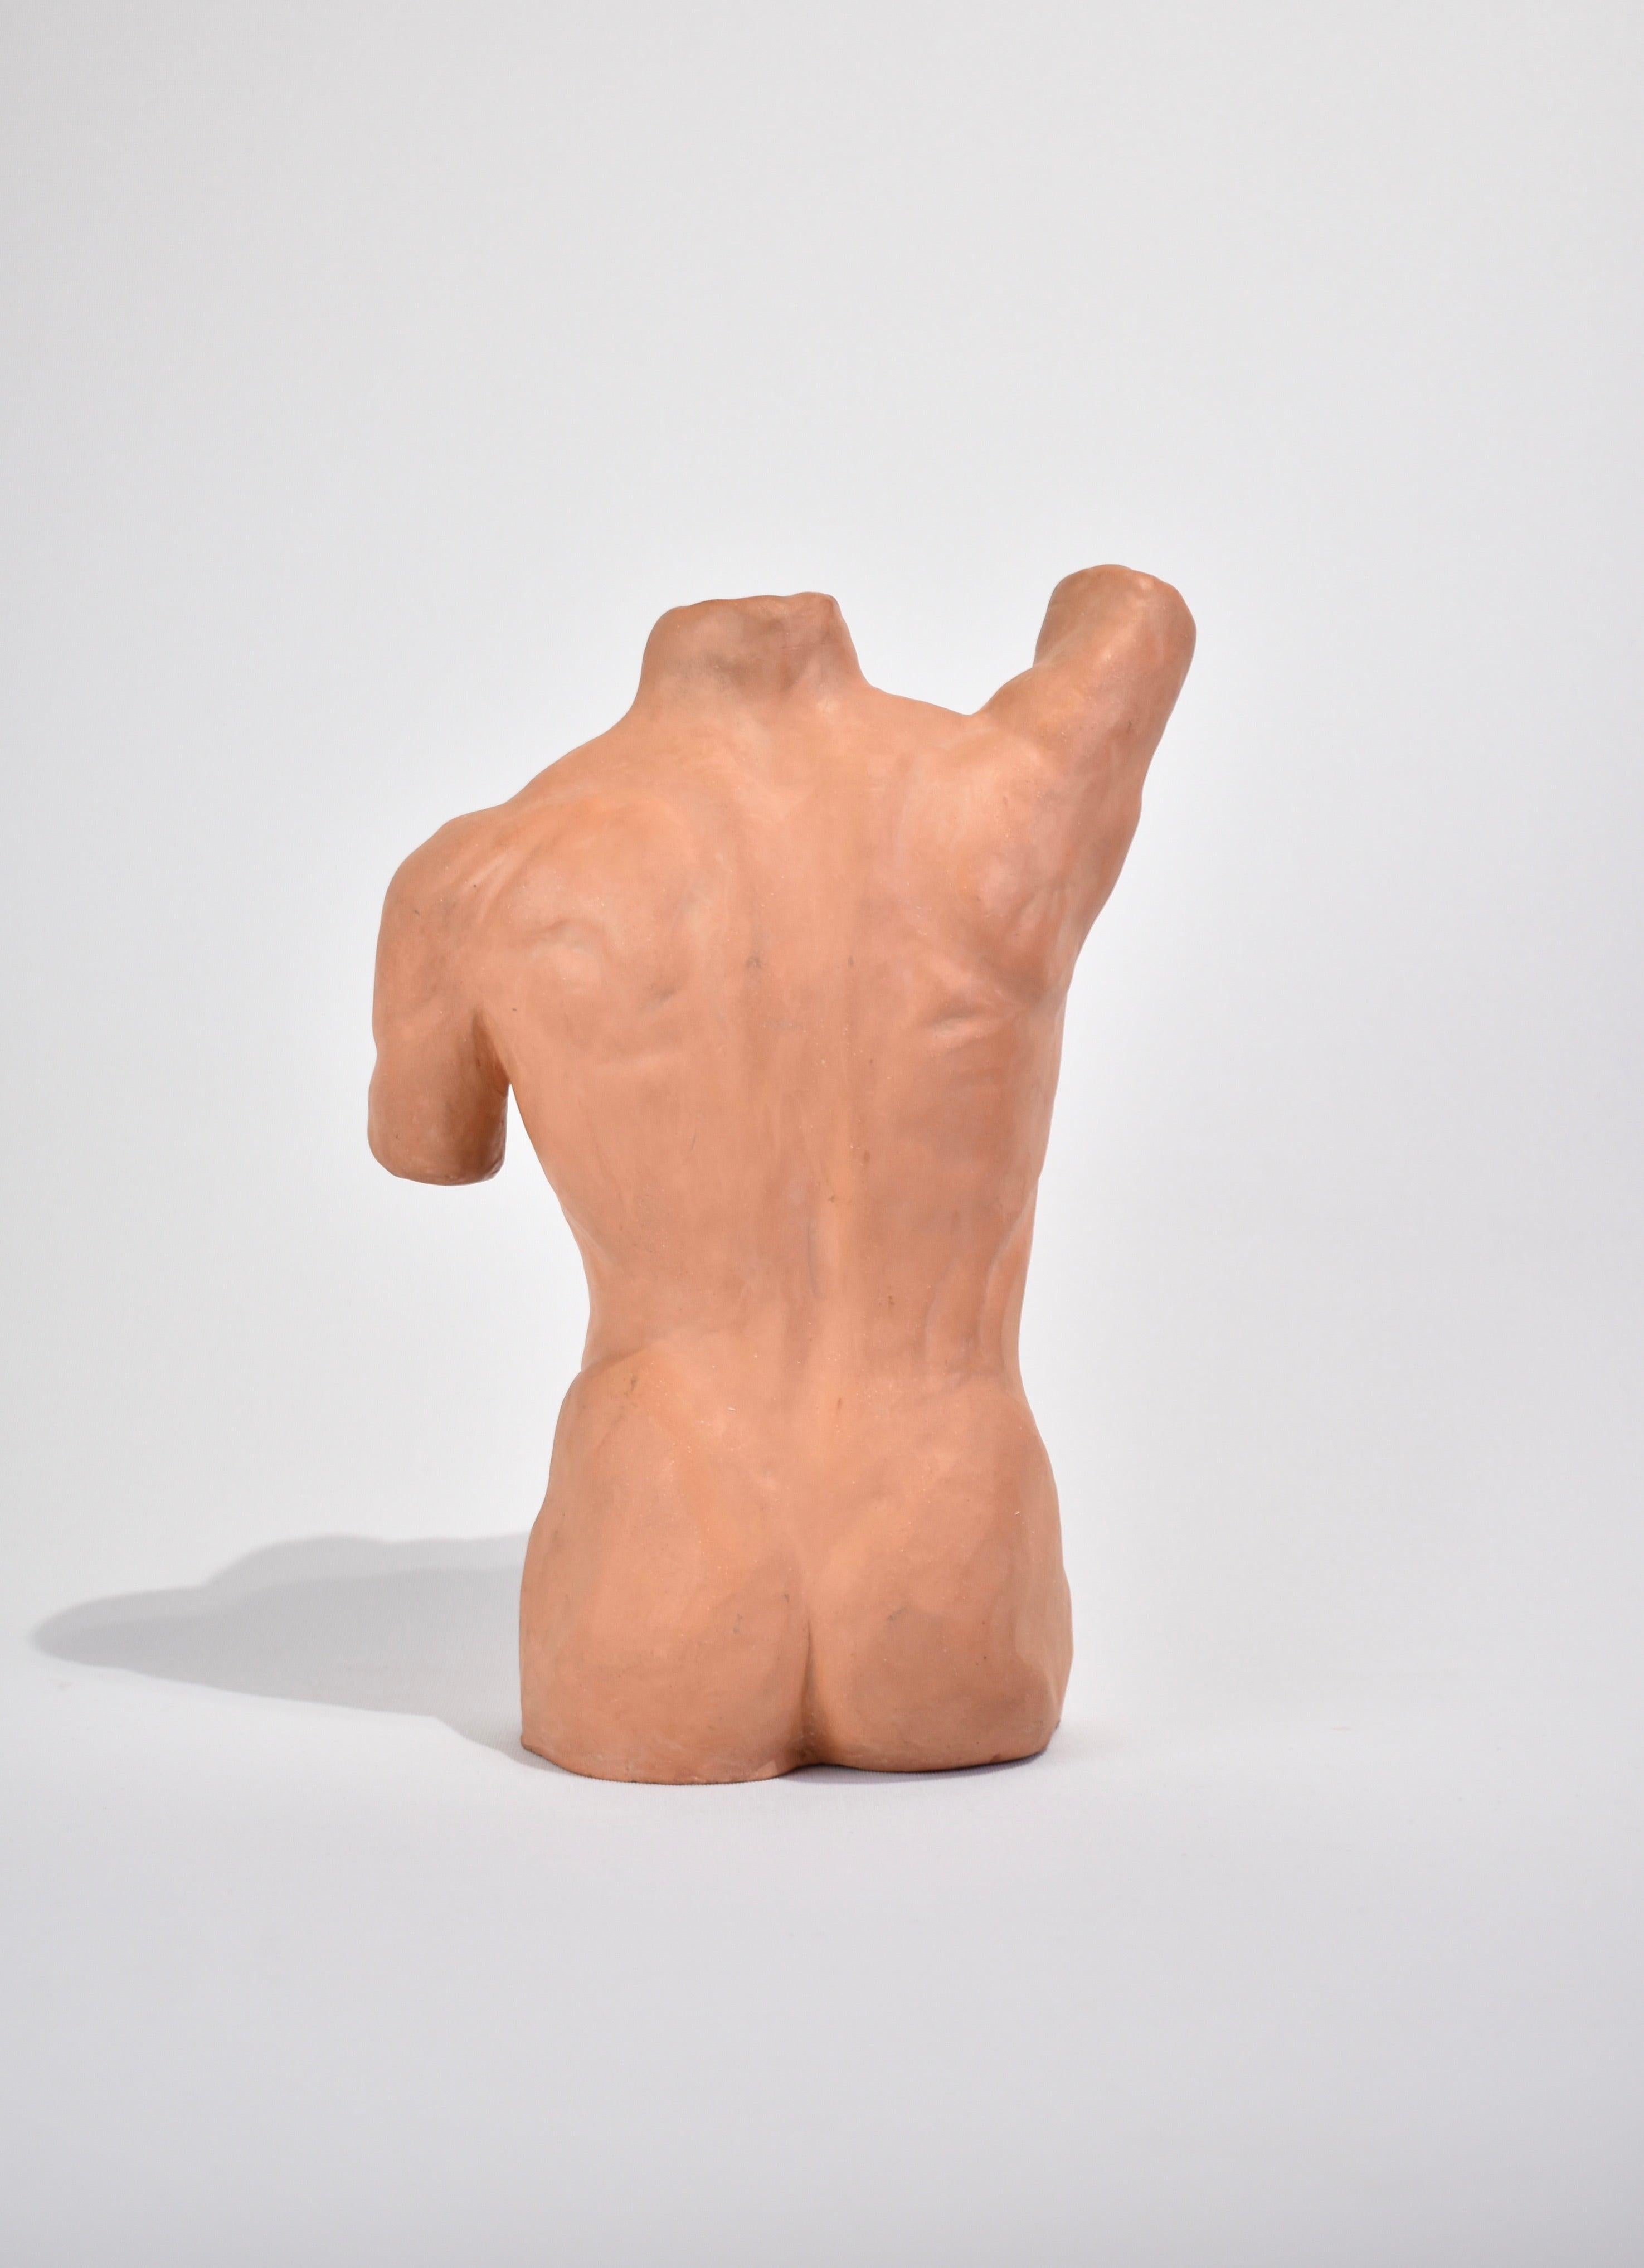 Hand-Crafted Male Torso Sculpture